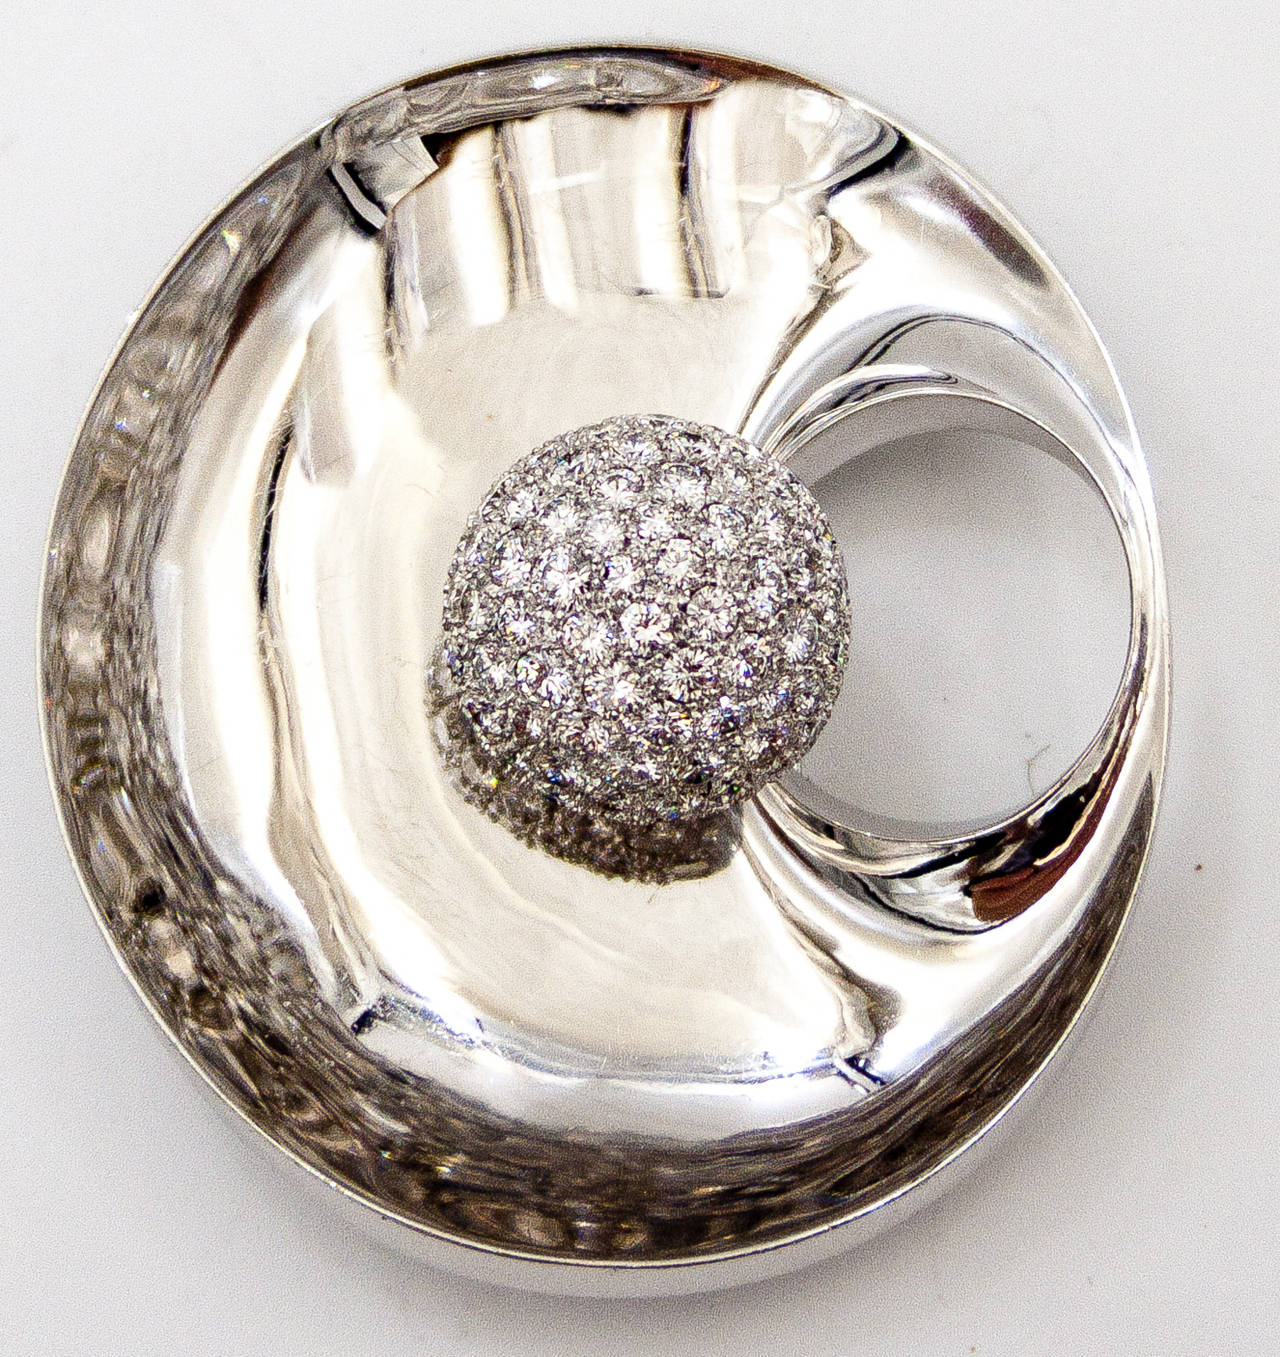 An intriguing suite by Piaget with beautifully set pave diamond balls both on the ears and floating on a pin of smoothly polished, mirror- finish 18karat white gold.   The pin has a wonderful, saucerlike dip towards the center, causing reflections